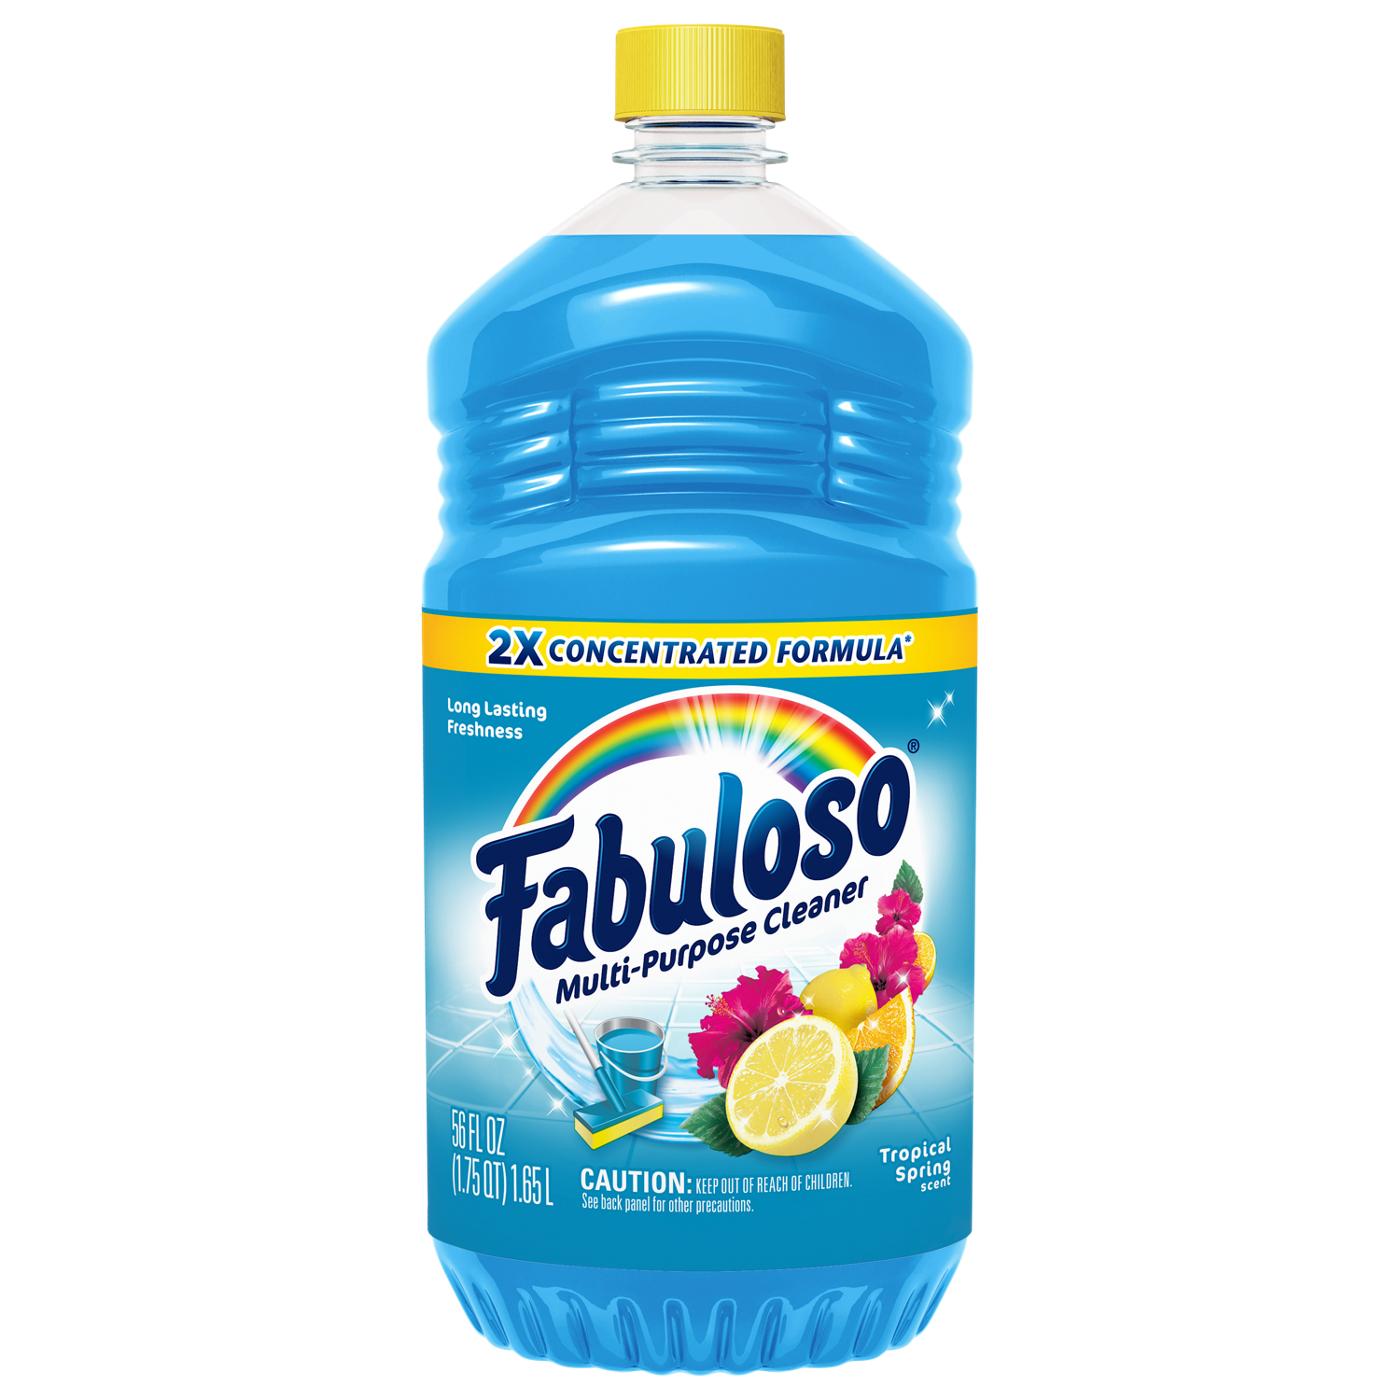 Fabuloso Multi-Purpose Cleaner - Tropical Spring; image 1 of 3